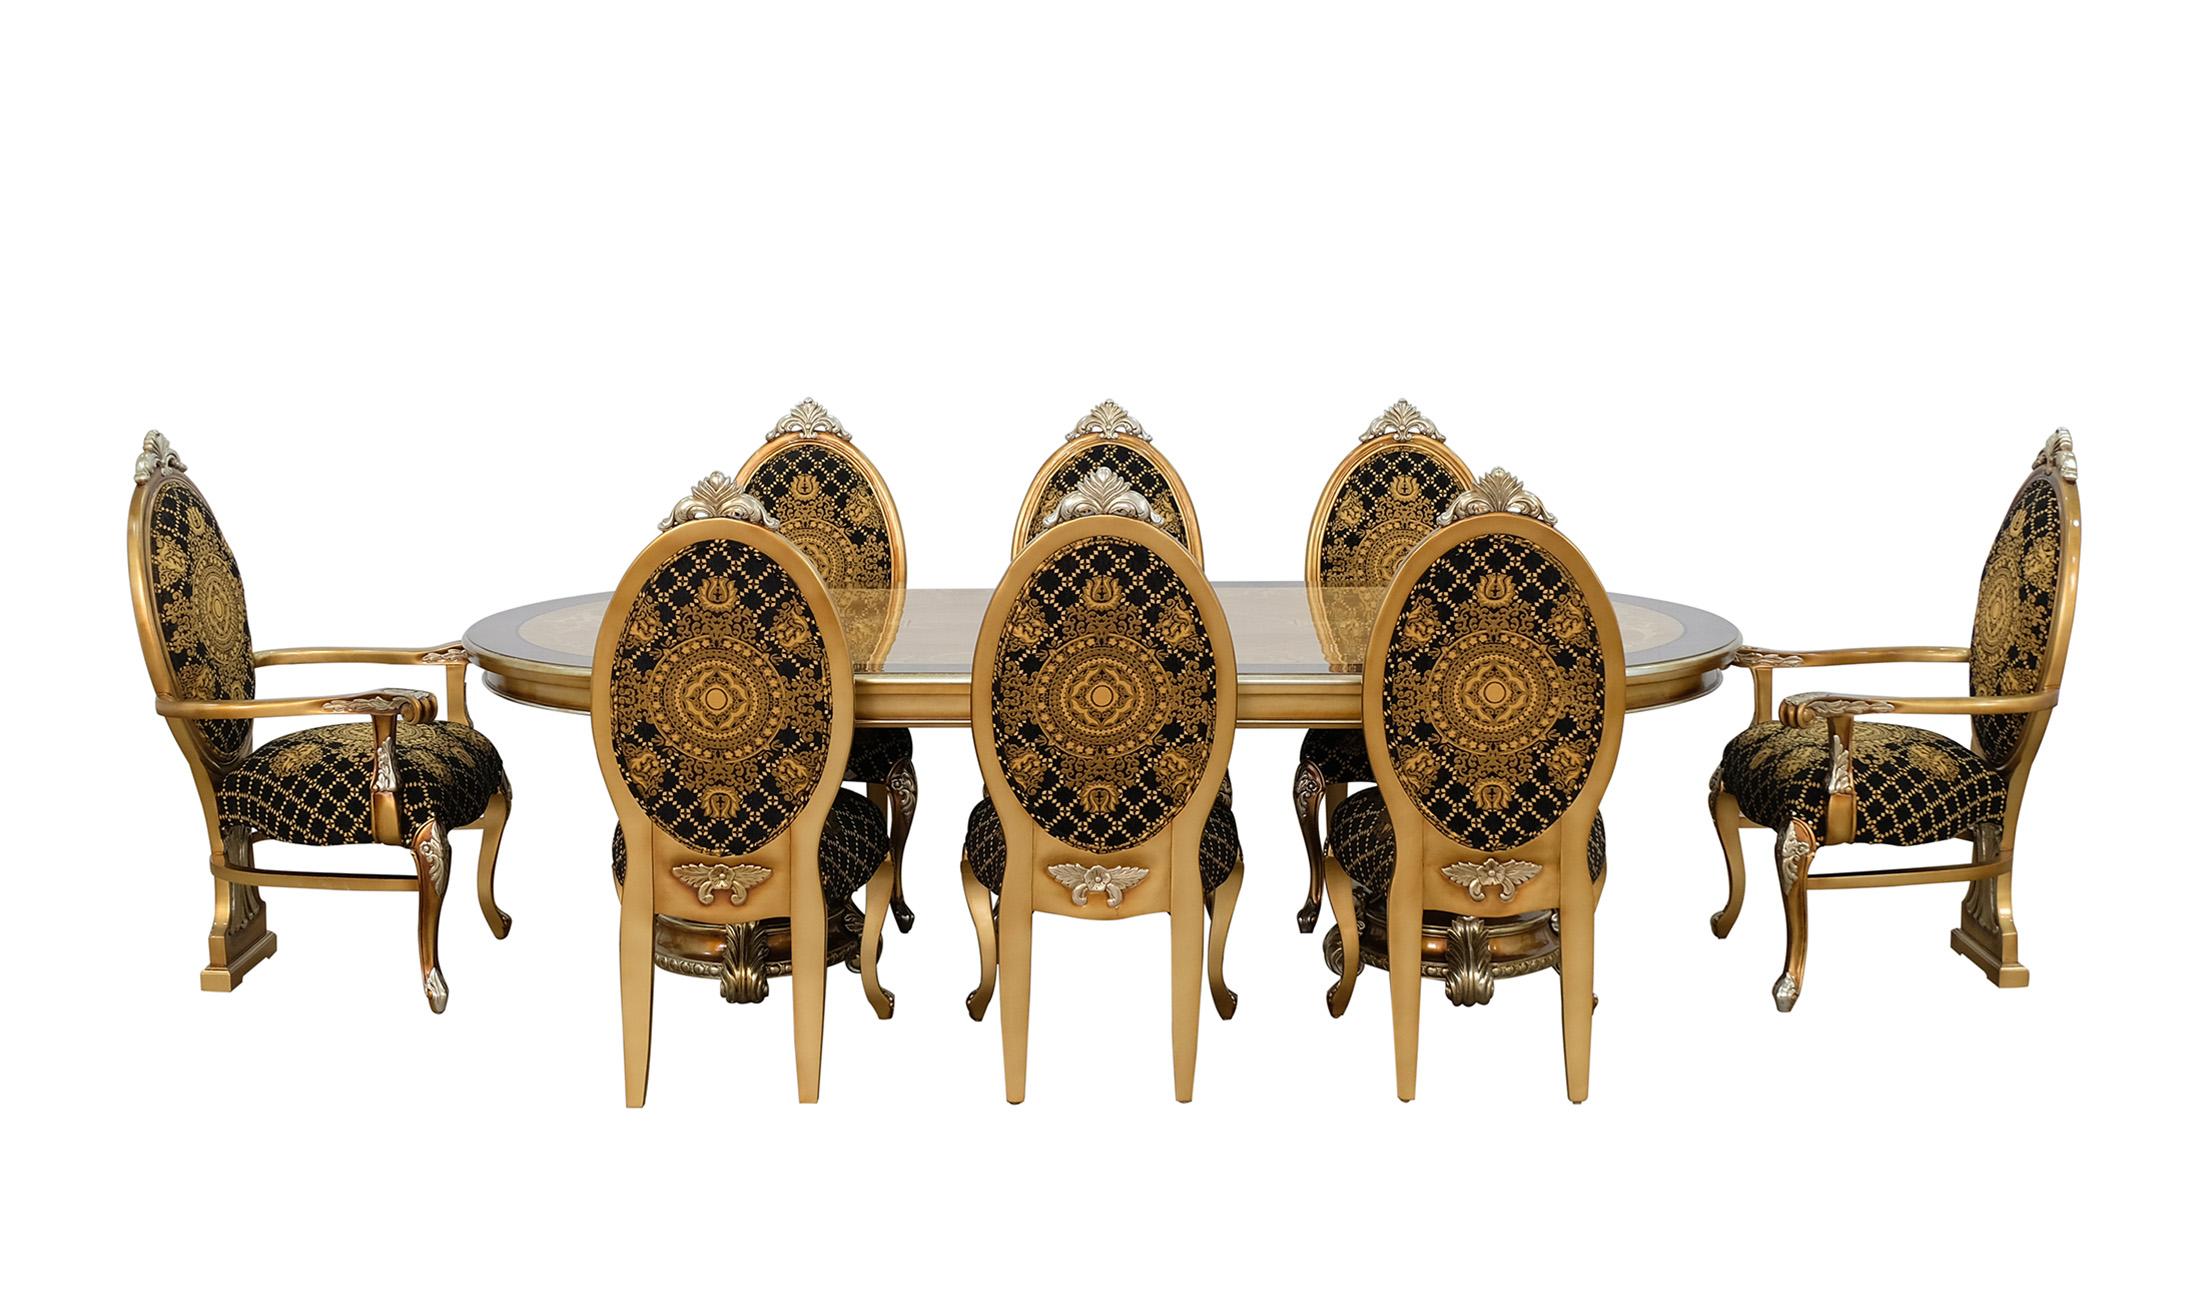 Classic, Traditional Dining Table Set EMPERADOR 42034-DT-Set-9 in Ebony, Silver, Brown Fabric